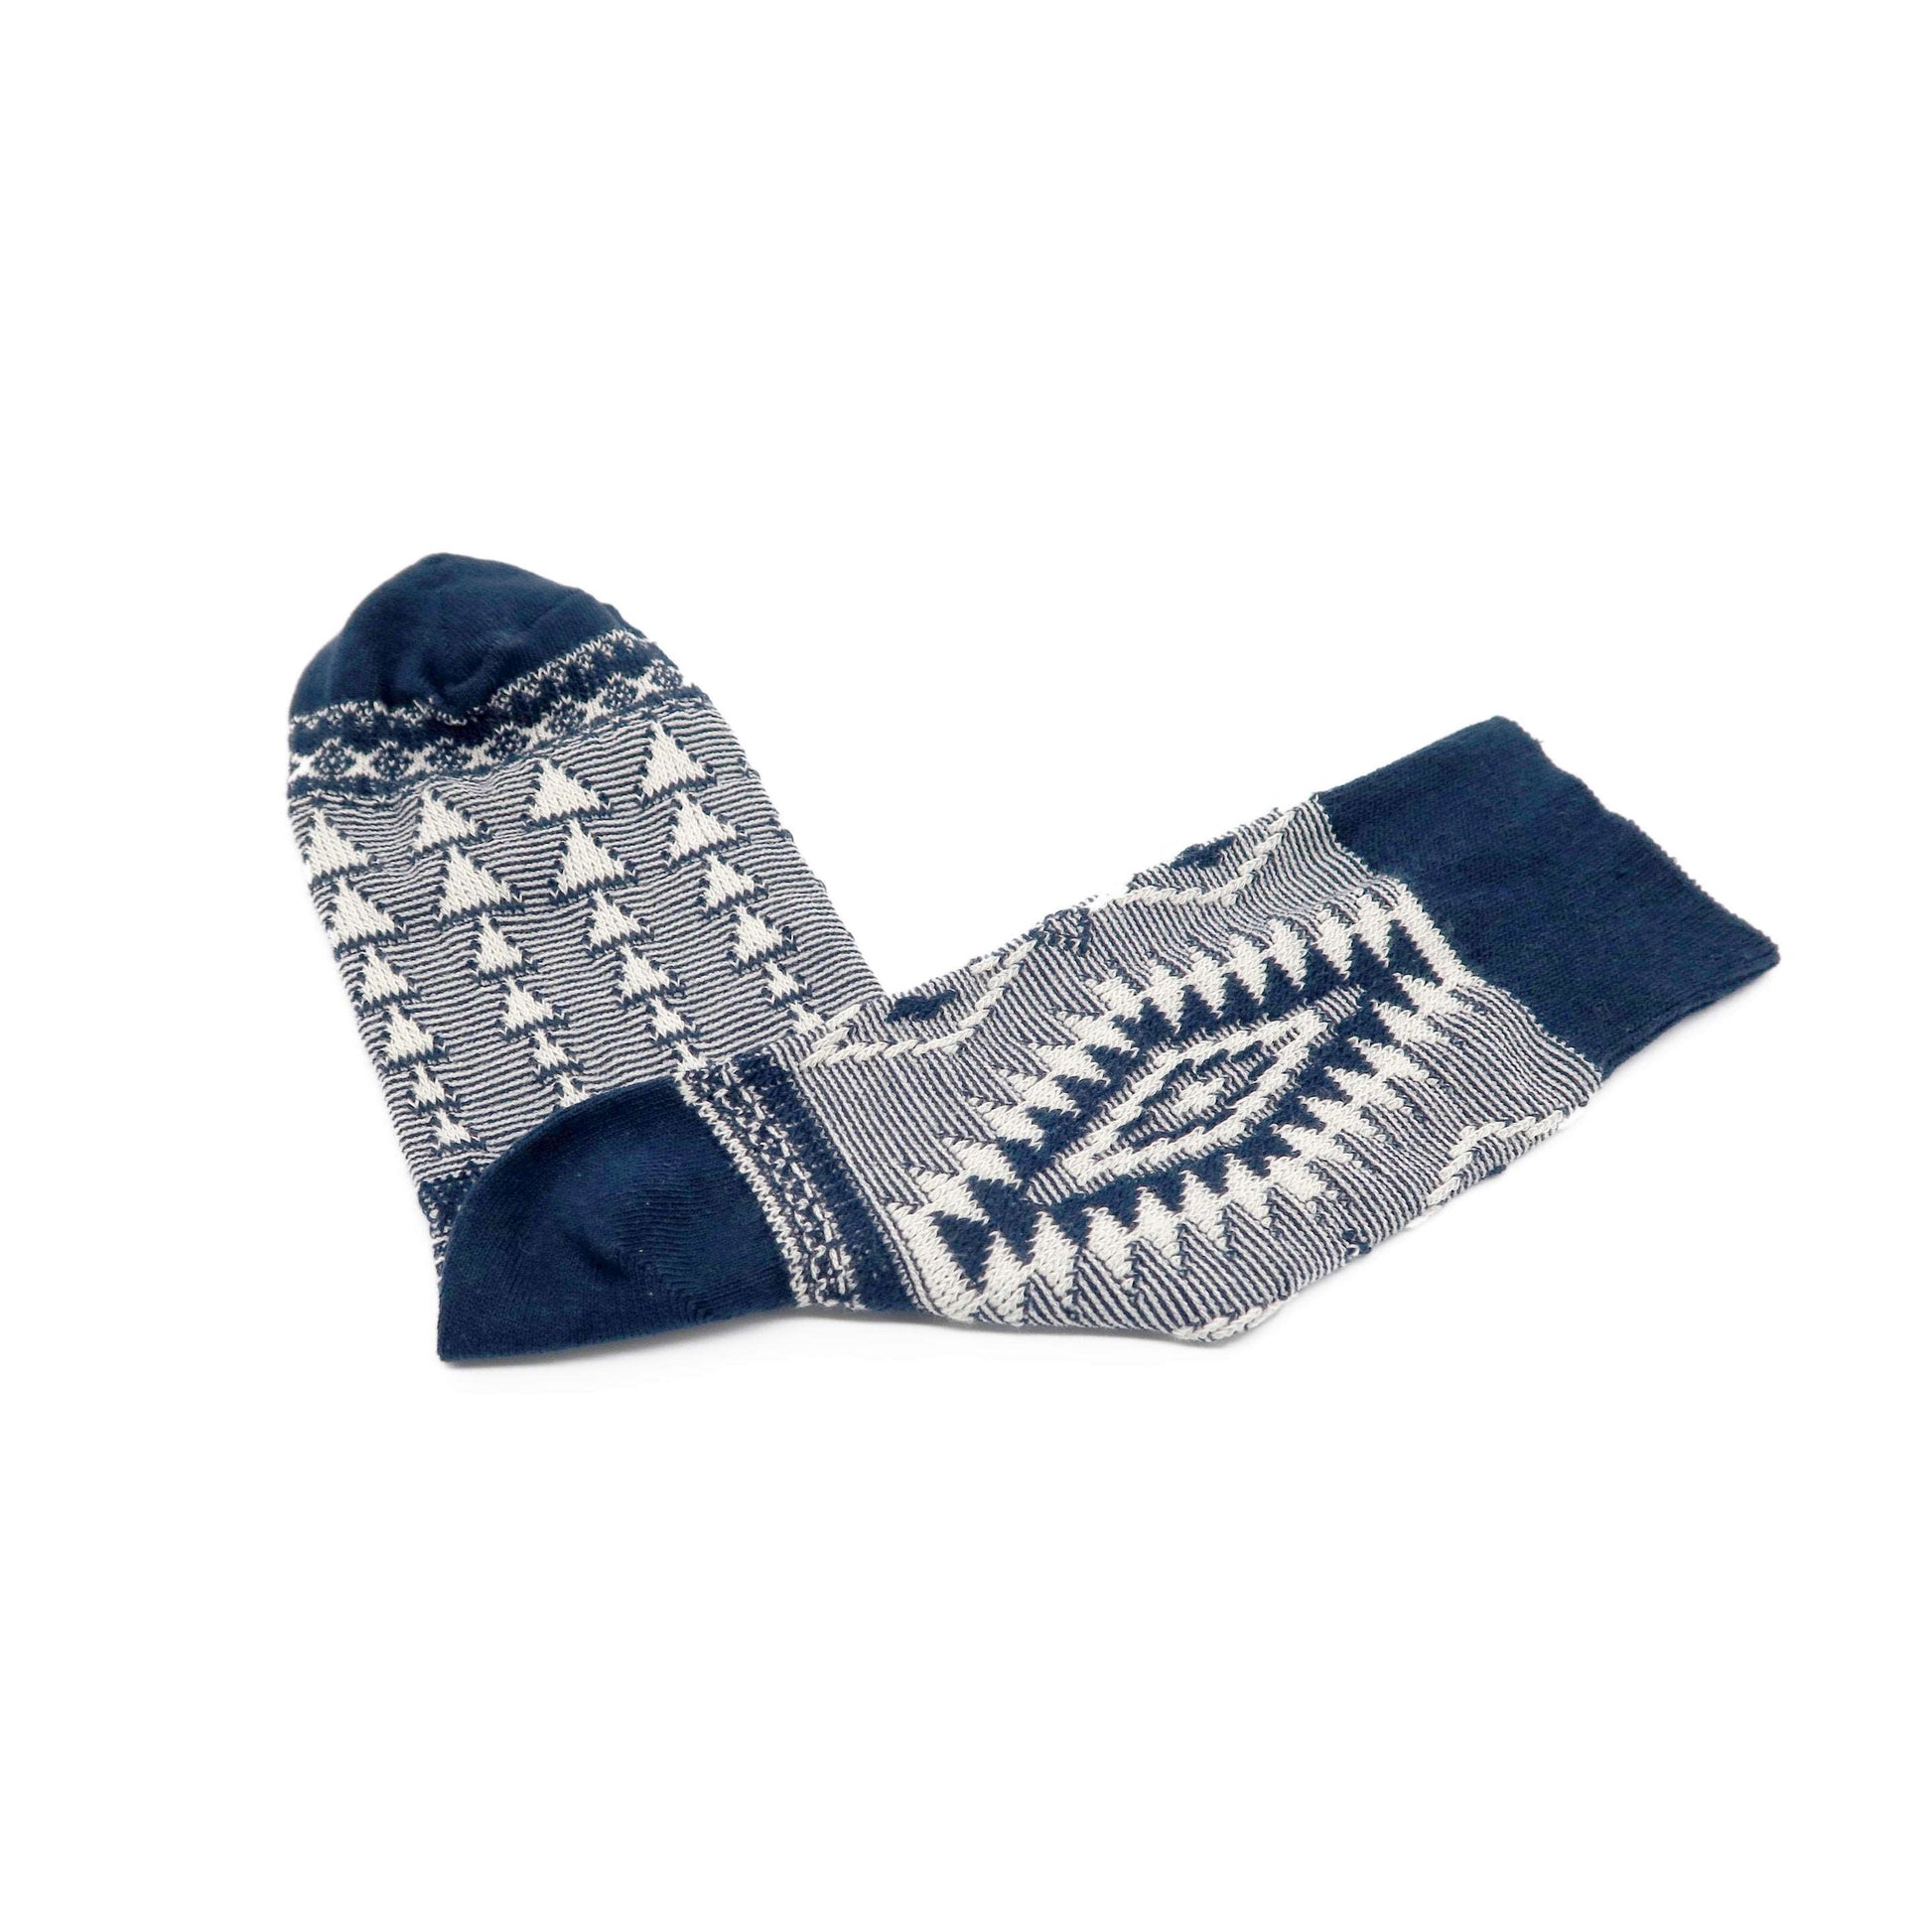 Africa Tribal pattern sock - navy color - front